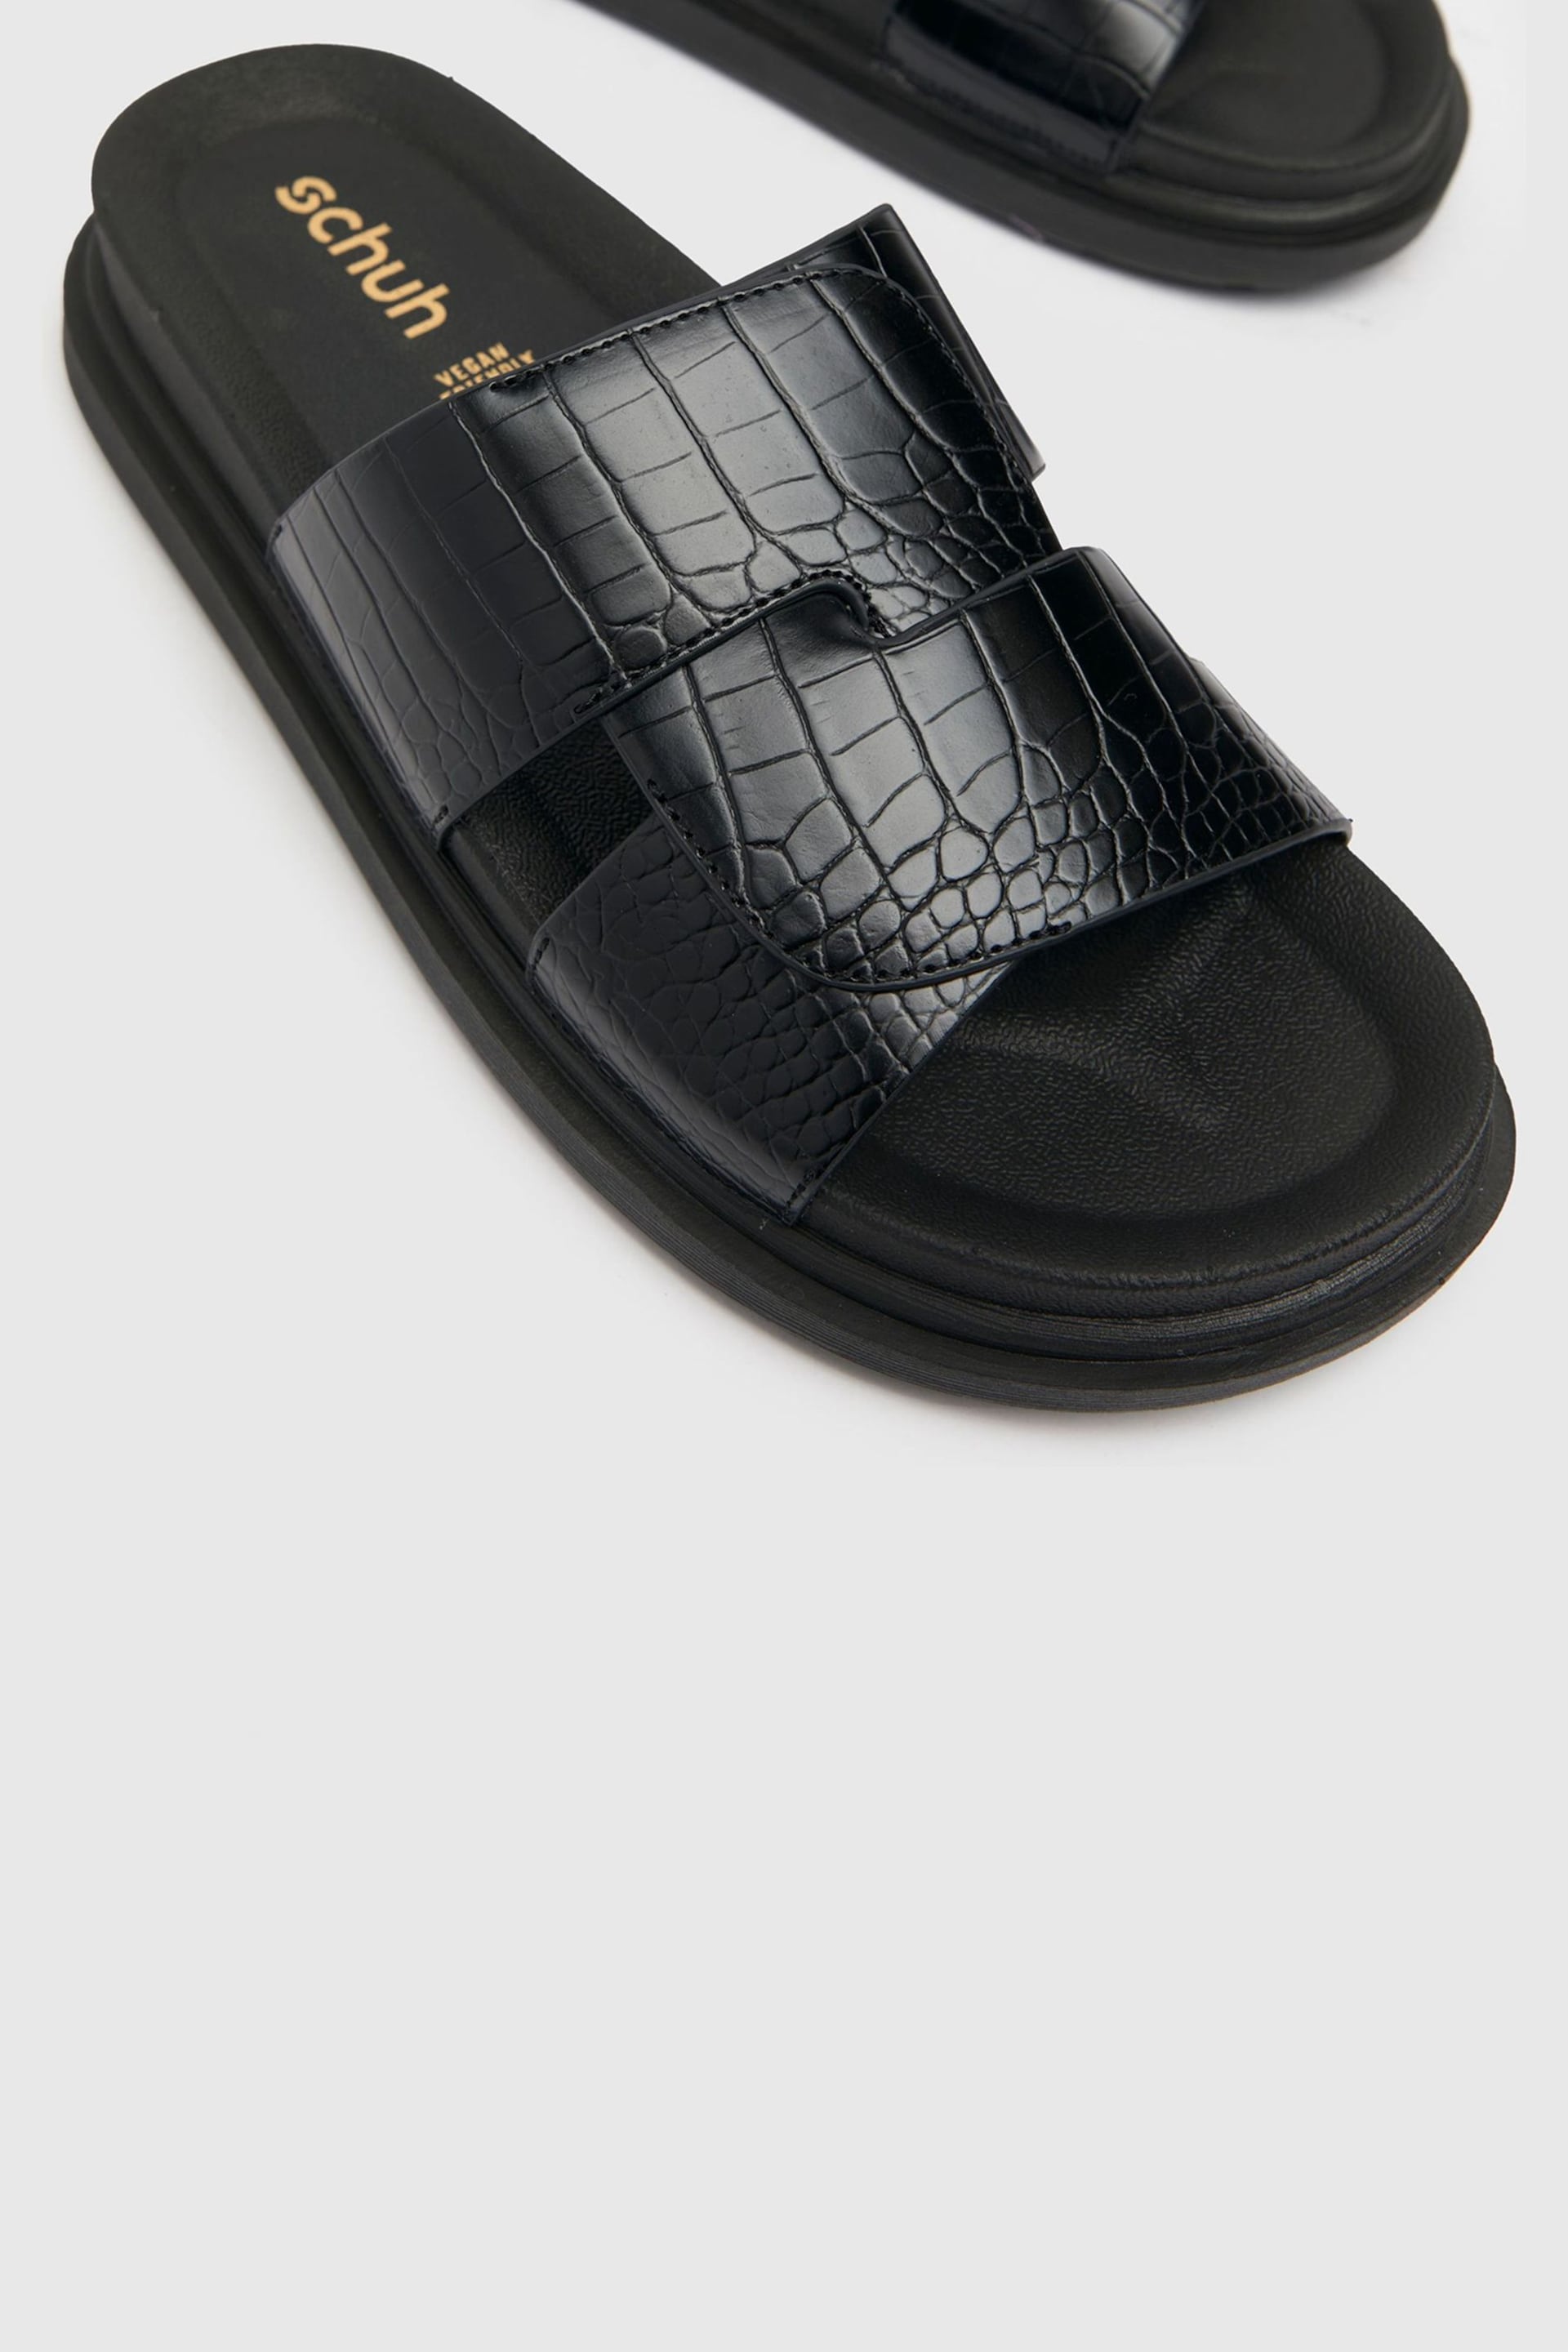 Schuh Tally Croc Cross Strap Footbed Sandals - Image 4 of 4